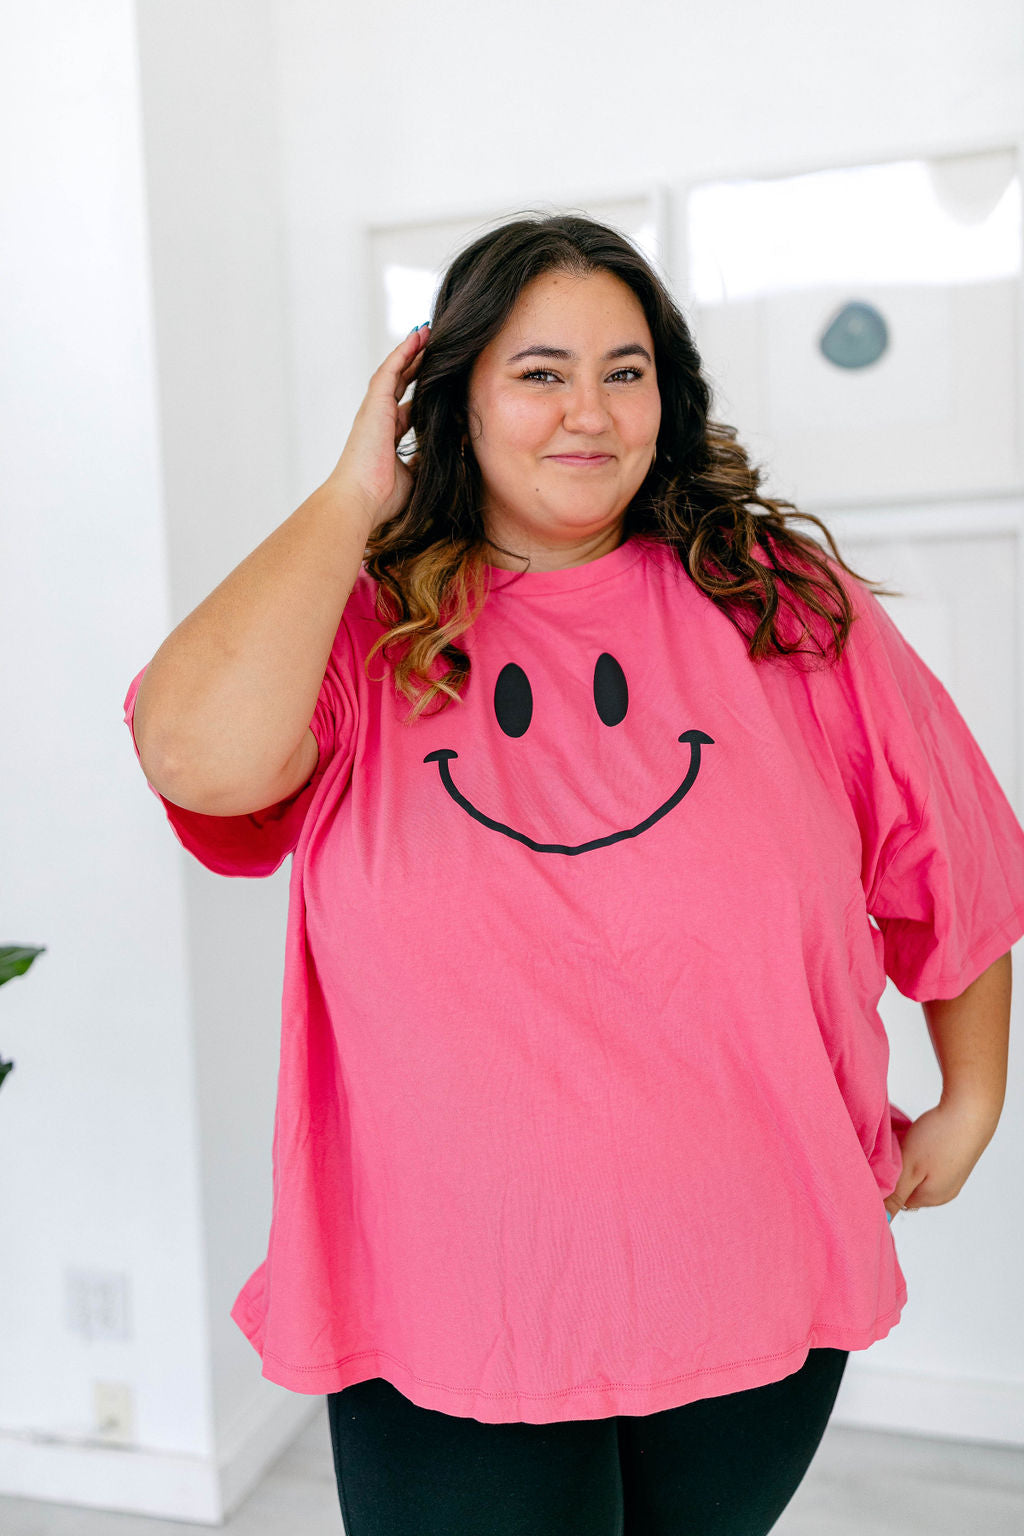 TABY ORIGINAL DESIGN: Smiley Boxy Tee PUFF*** IN Tooty Frooty***